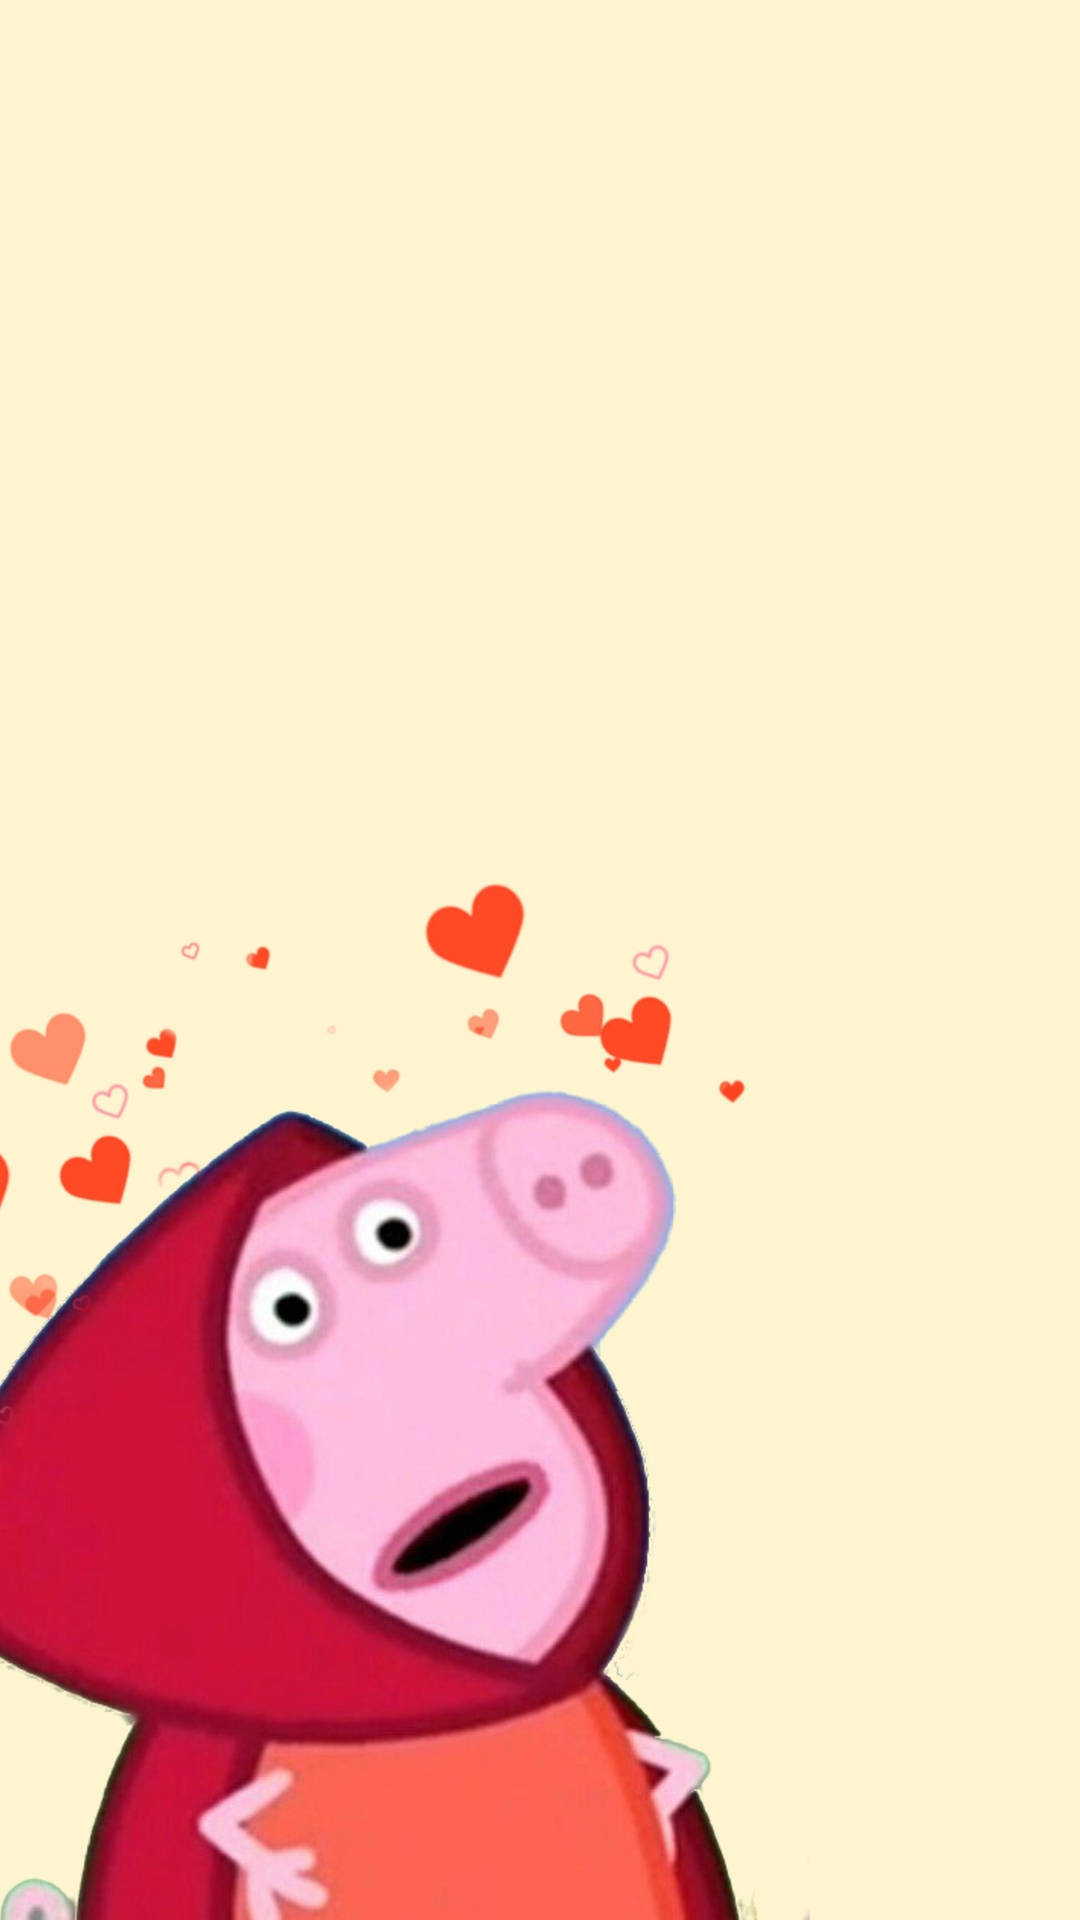 Hearts And Red Hooded Peppa Pig Iphone Background